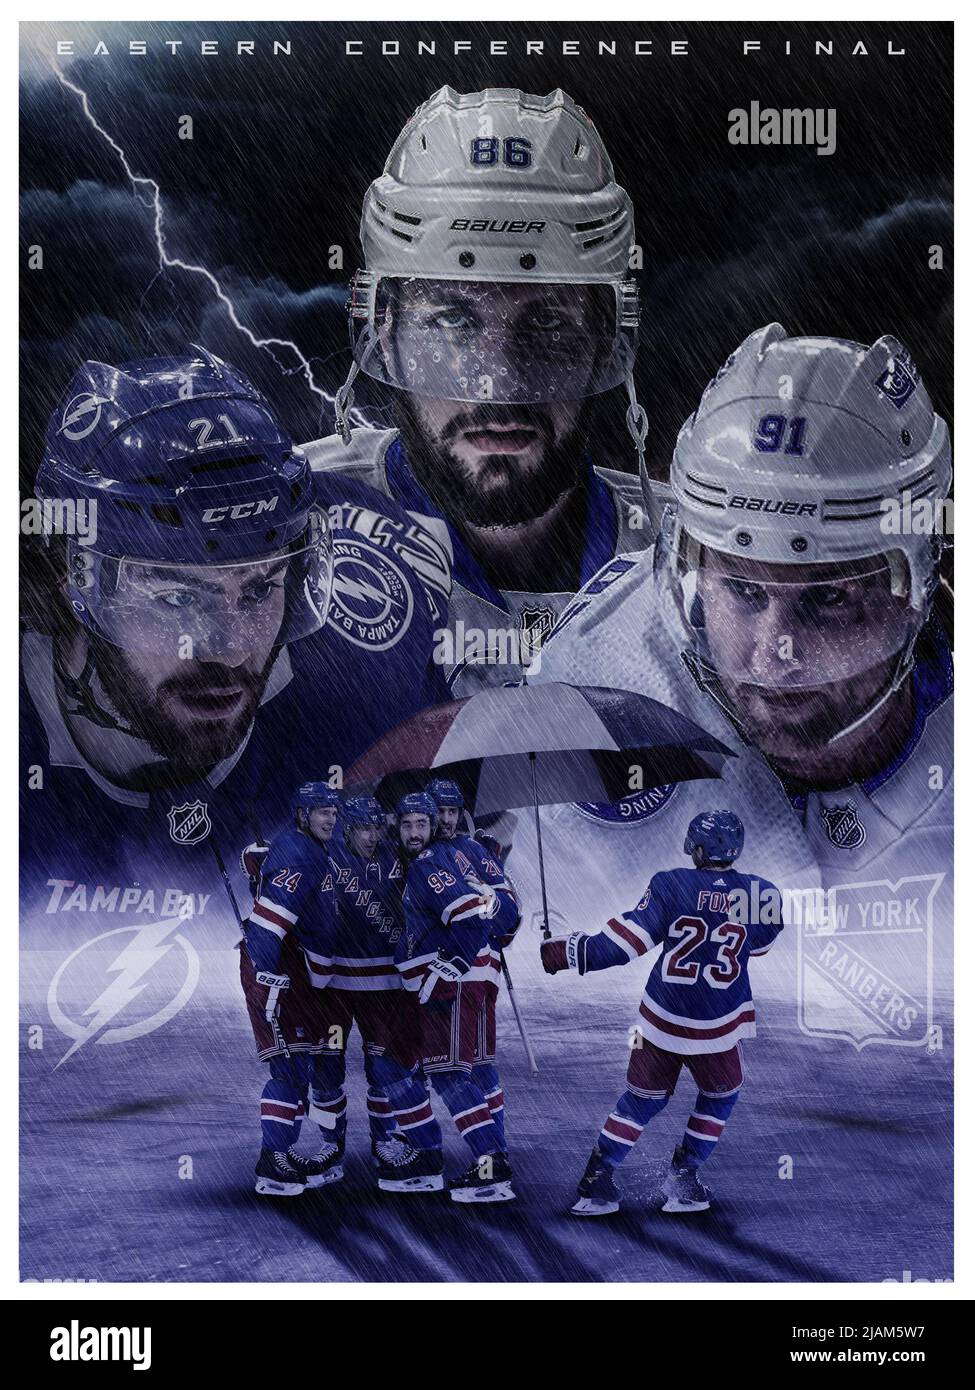 NHL Eastern Conference Final Game 1 Poster Stock Photo